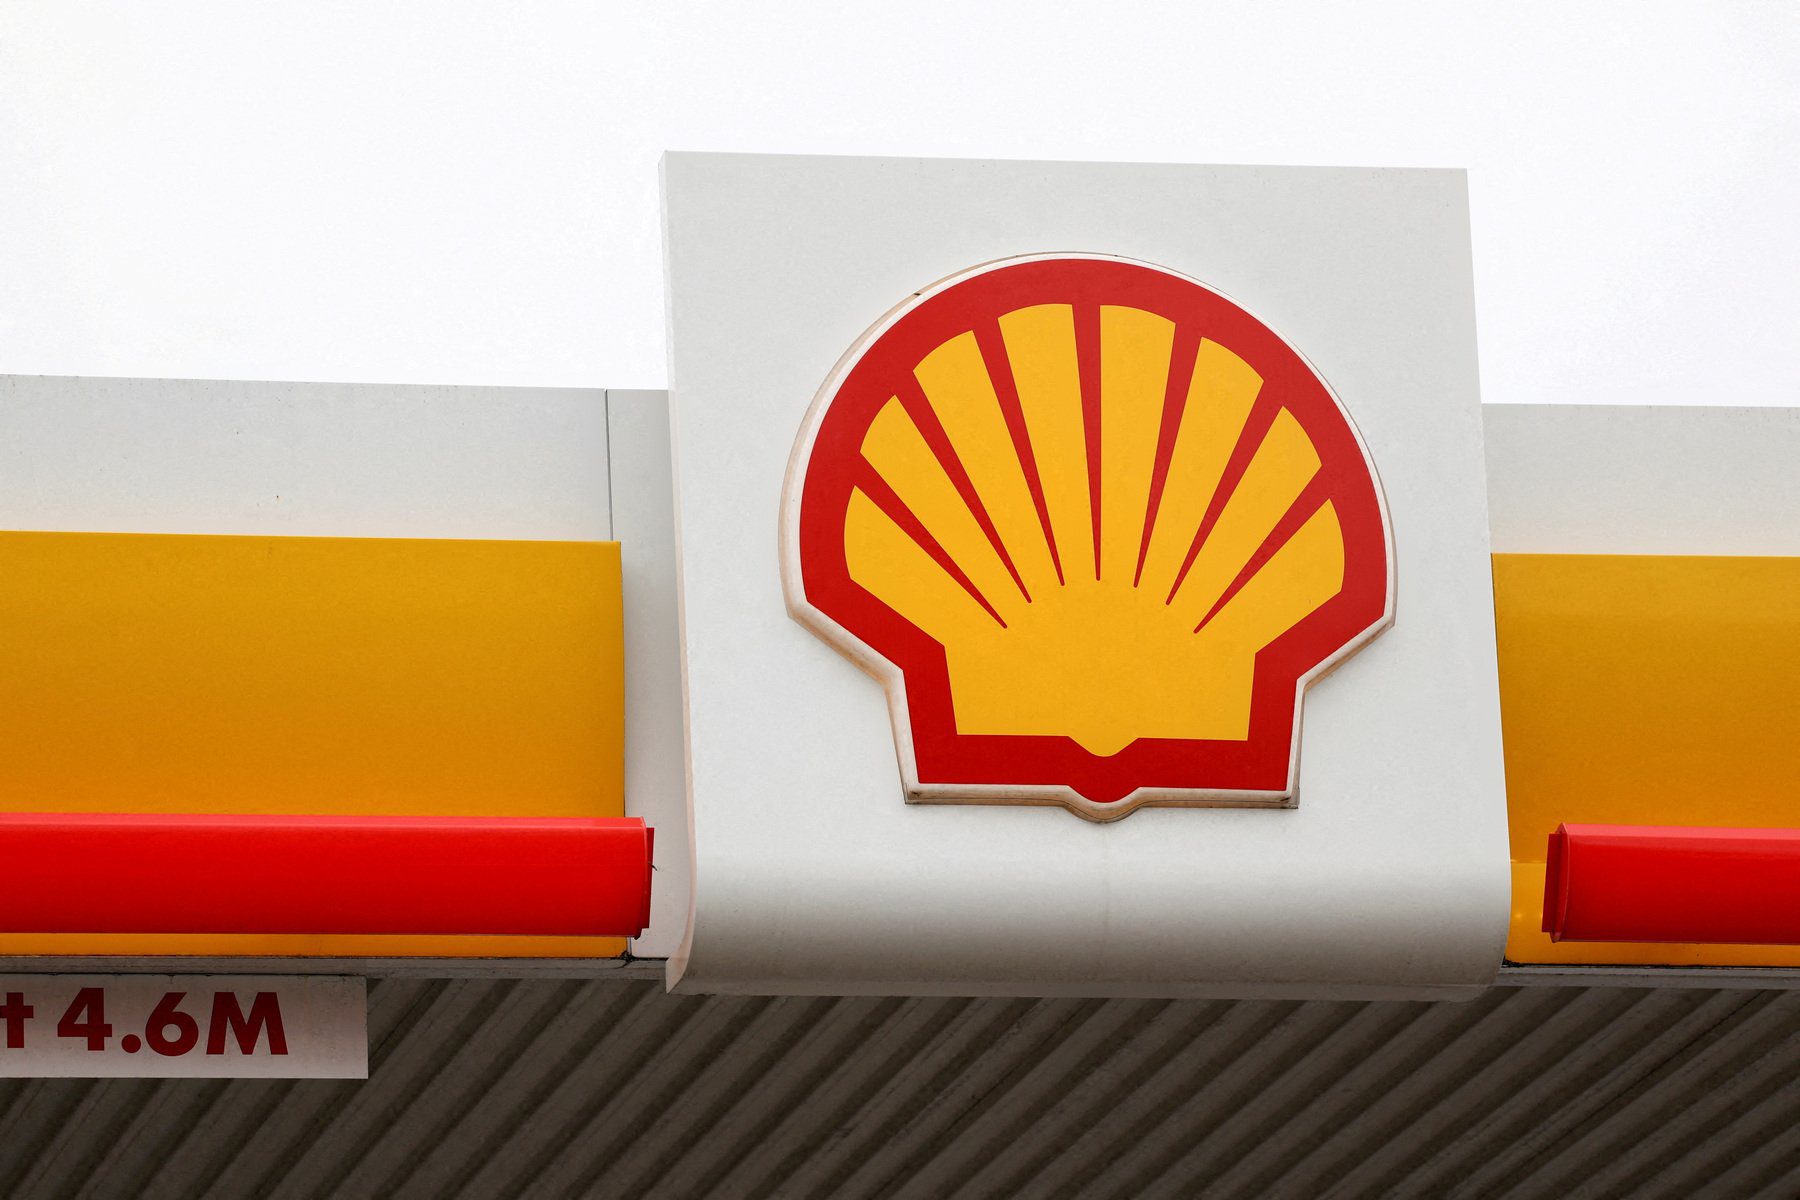 Shell allocates $15 billion to support low carbon energy solutions